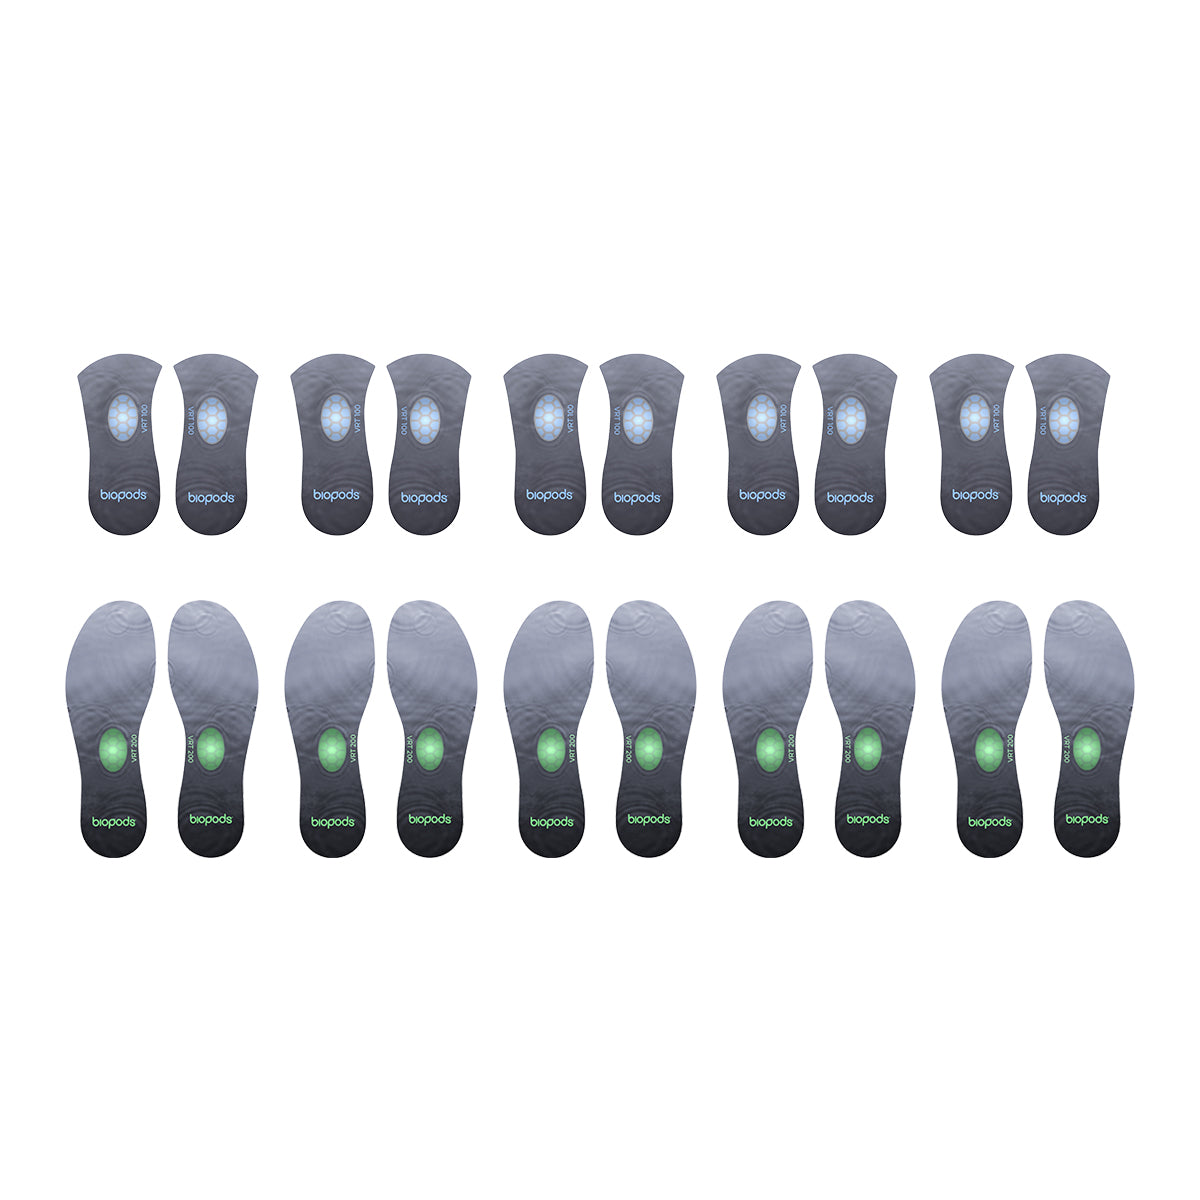 Starter Kit (10 Pairs of Next Generation Insoles)